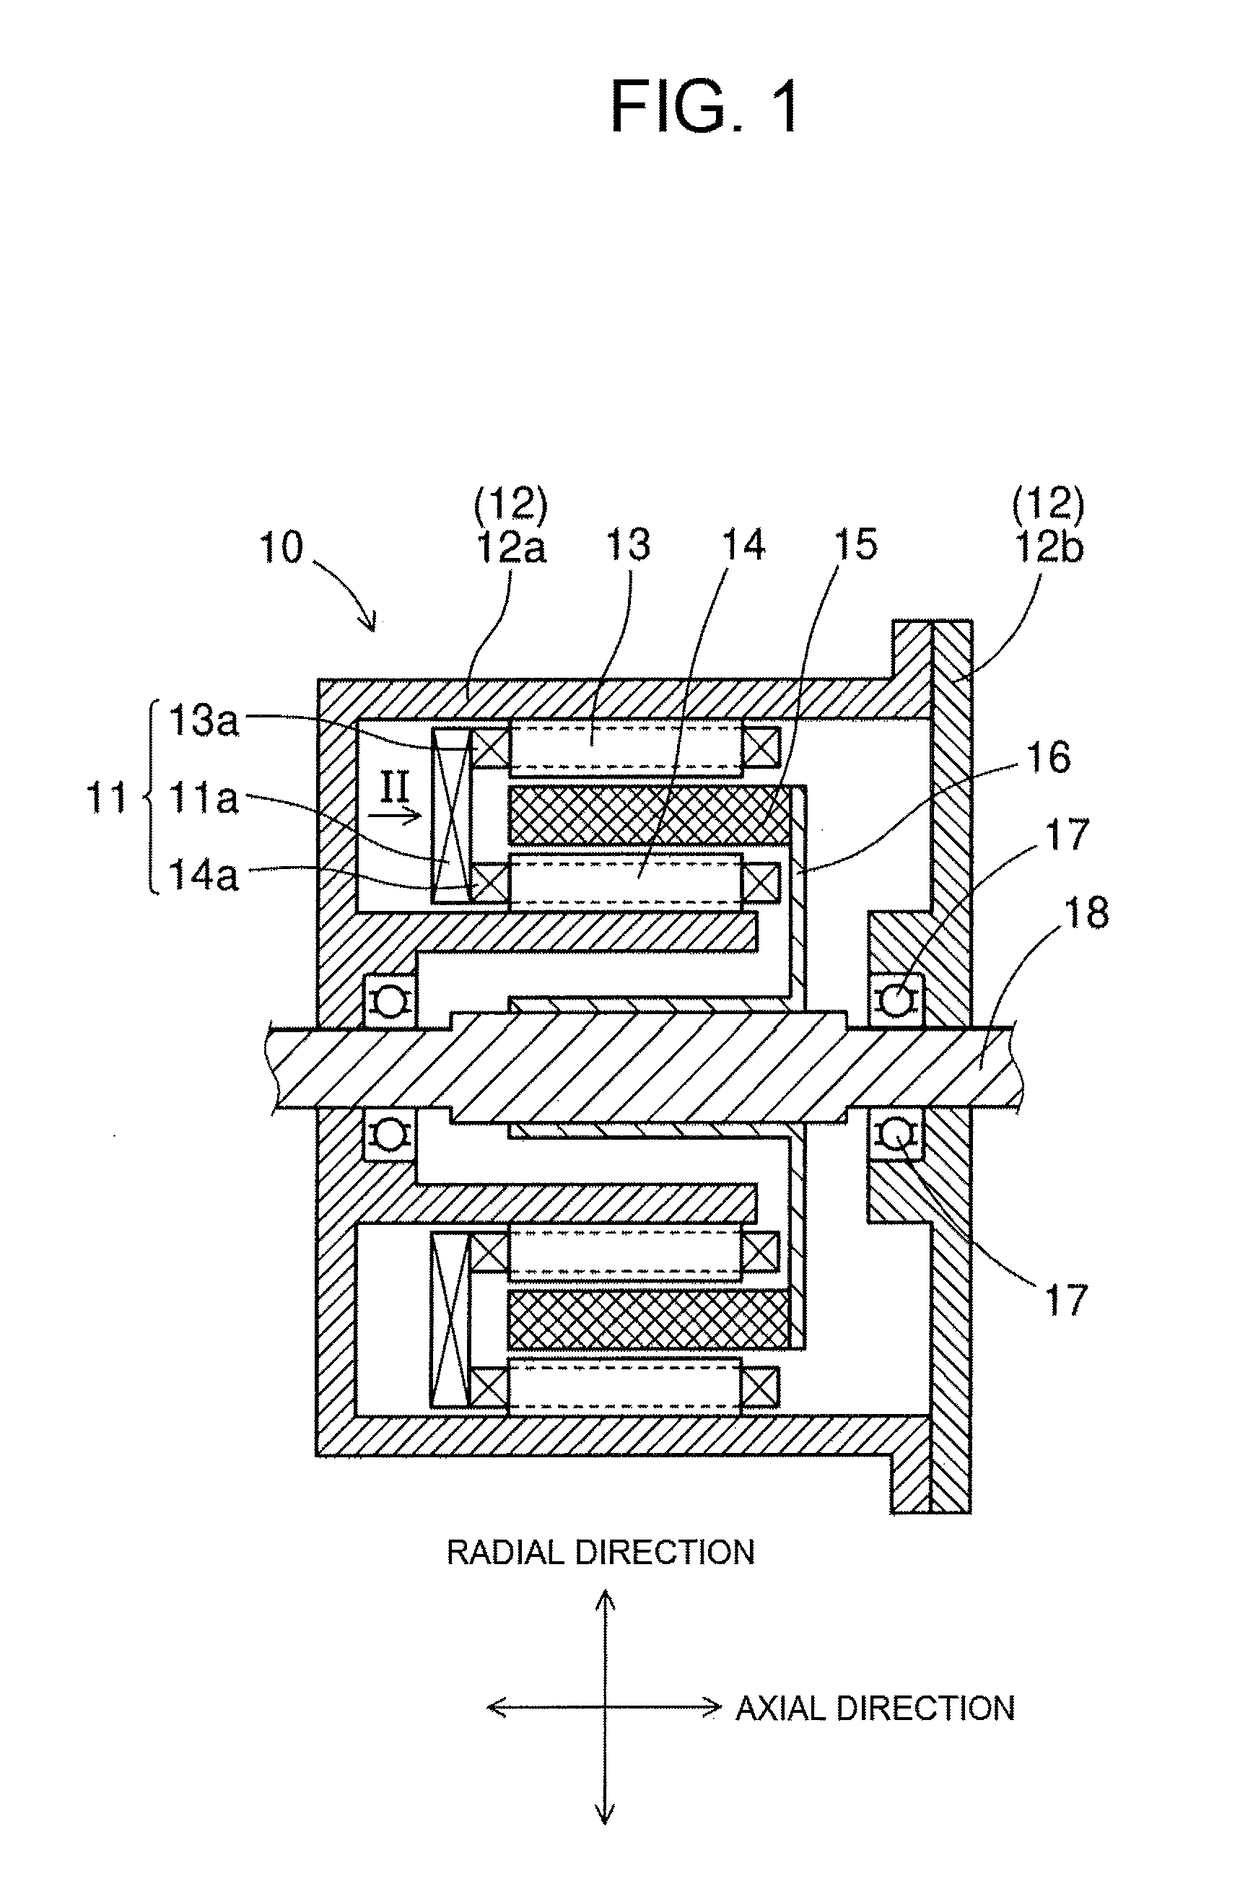 Double-stator rotating electric machine